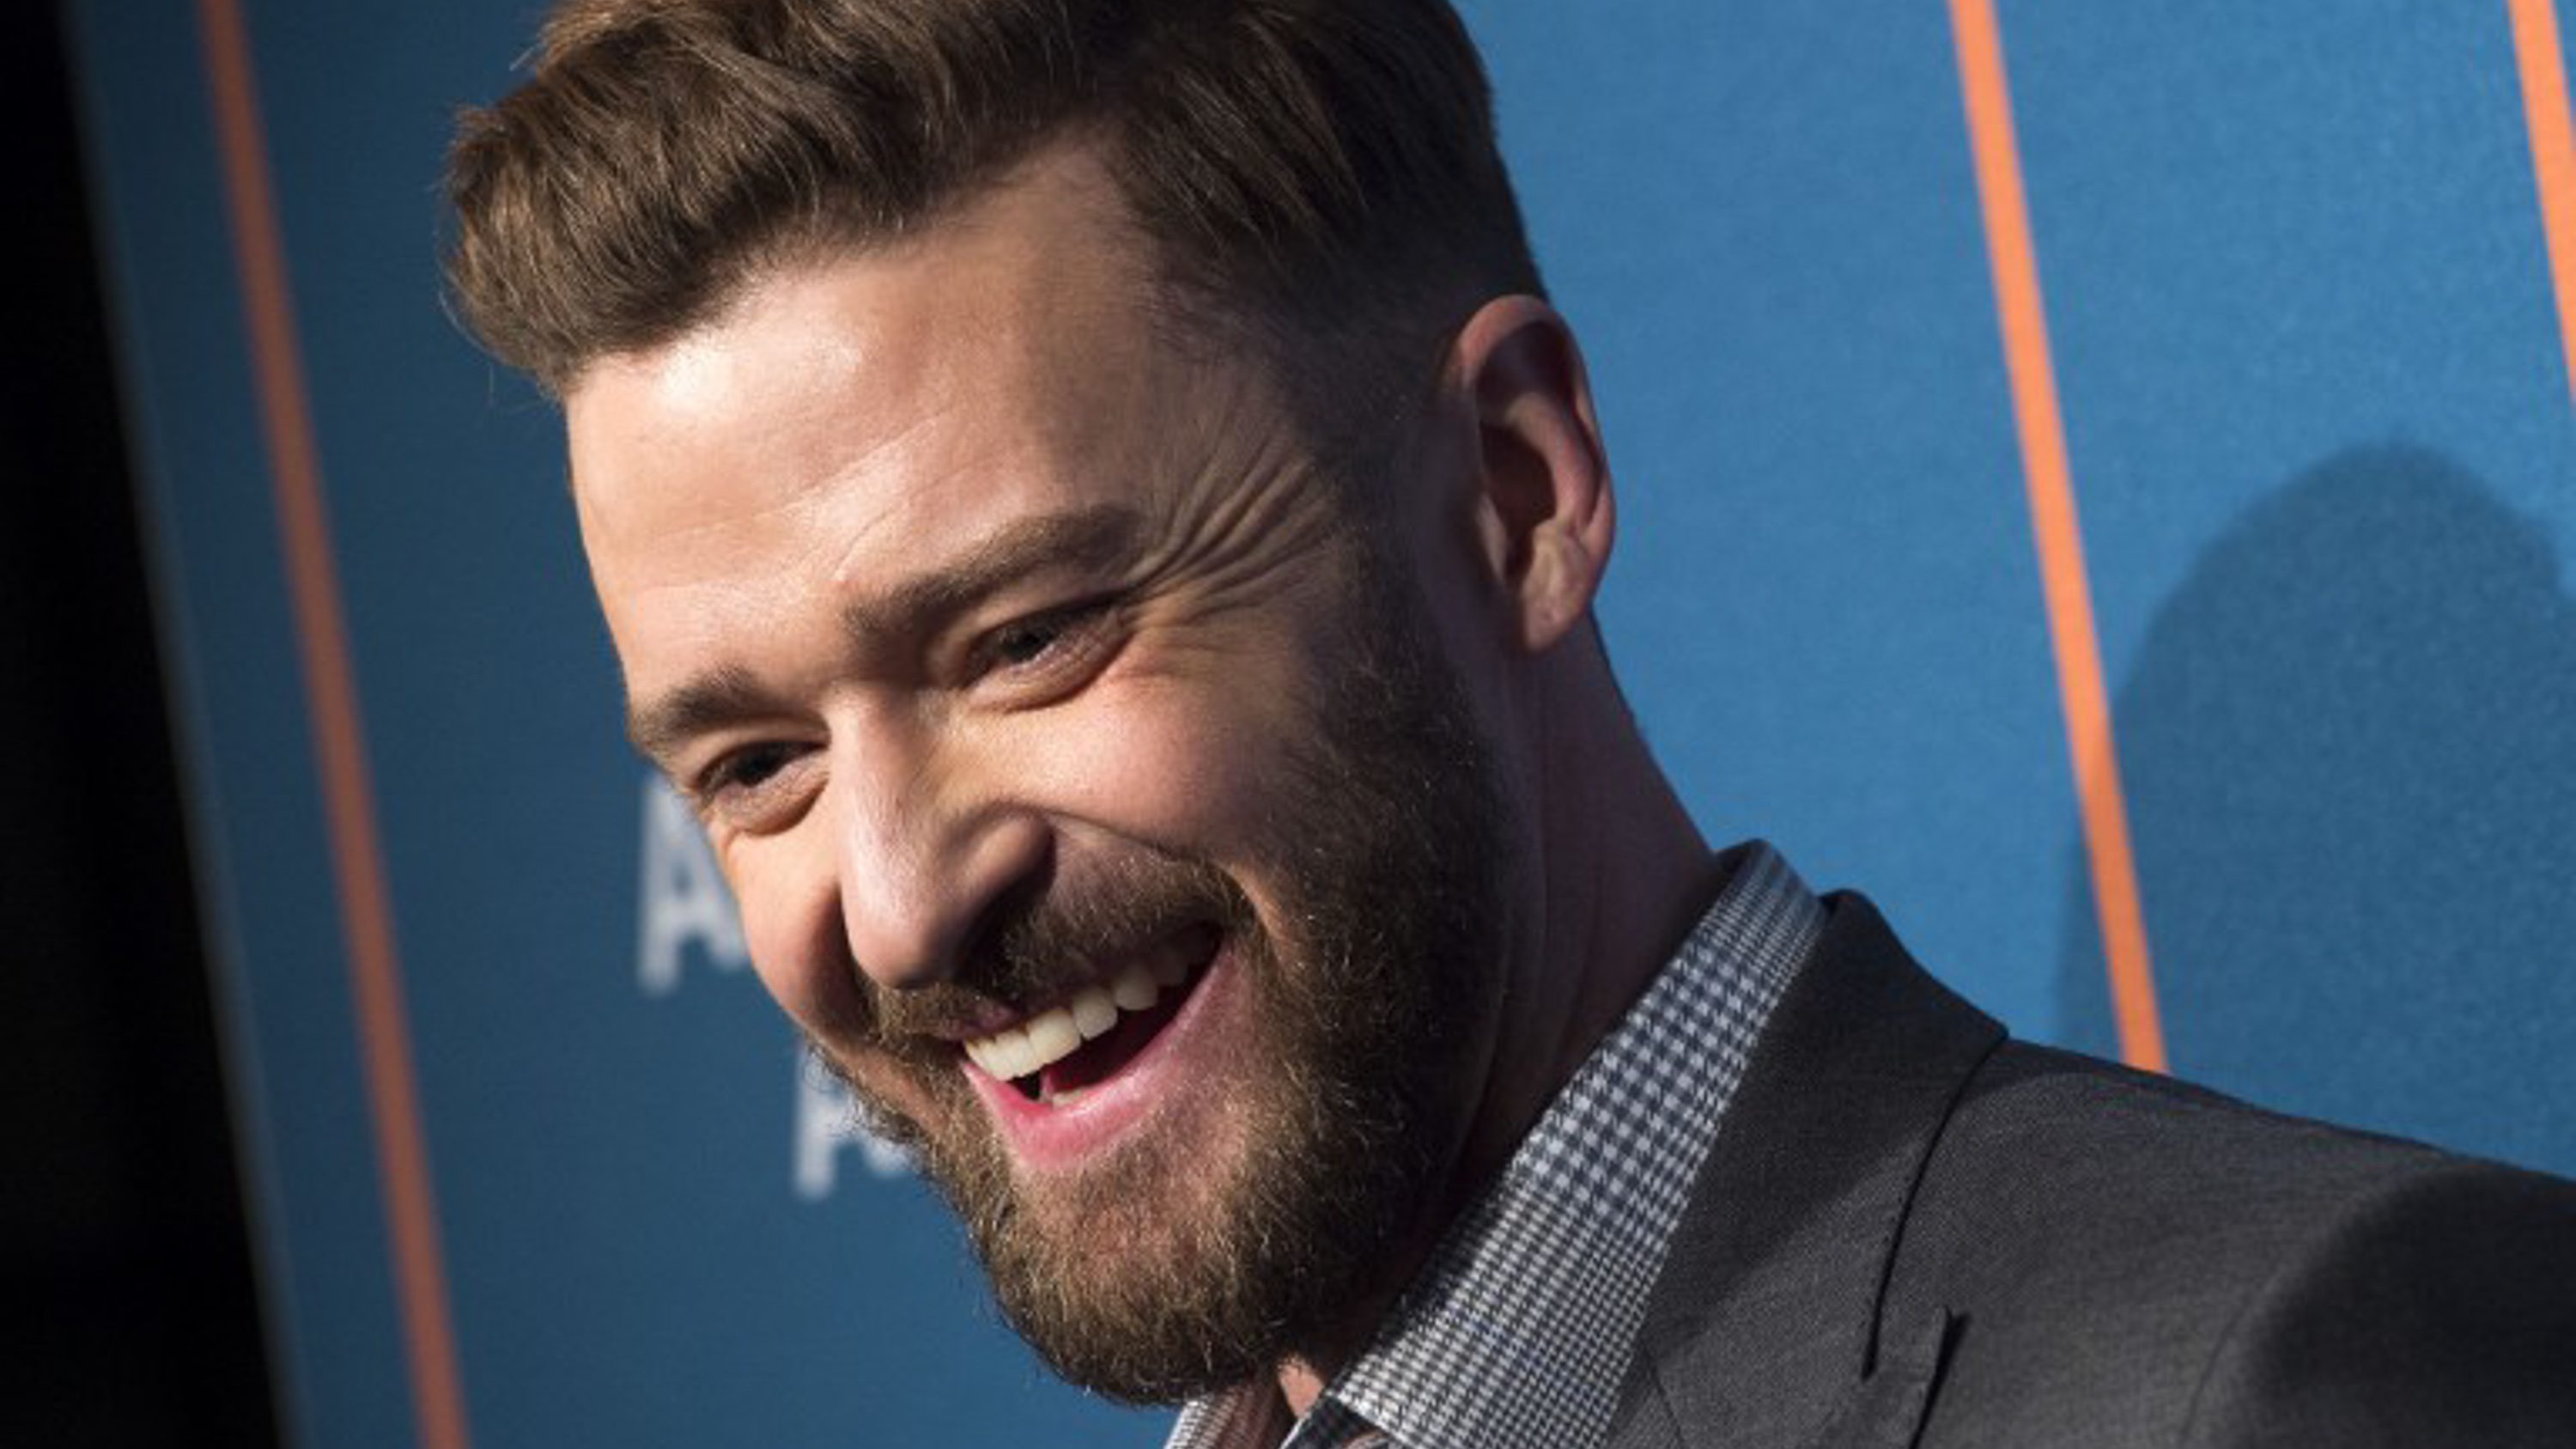 JUSTIN TIMBERLAKE. The singer/actor explains why he left boyband *NSYNC. File photo shows Justin at Hollywood Reporter's 5th Annual Nominees Night on February 6, 2017 in Beverly Hills, California. Photo by Valerie Macon/AFP Photo 